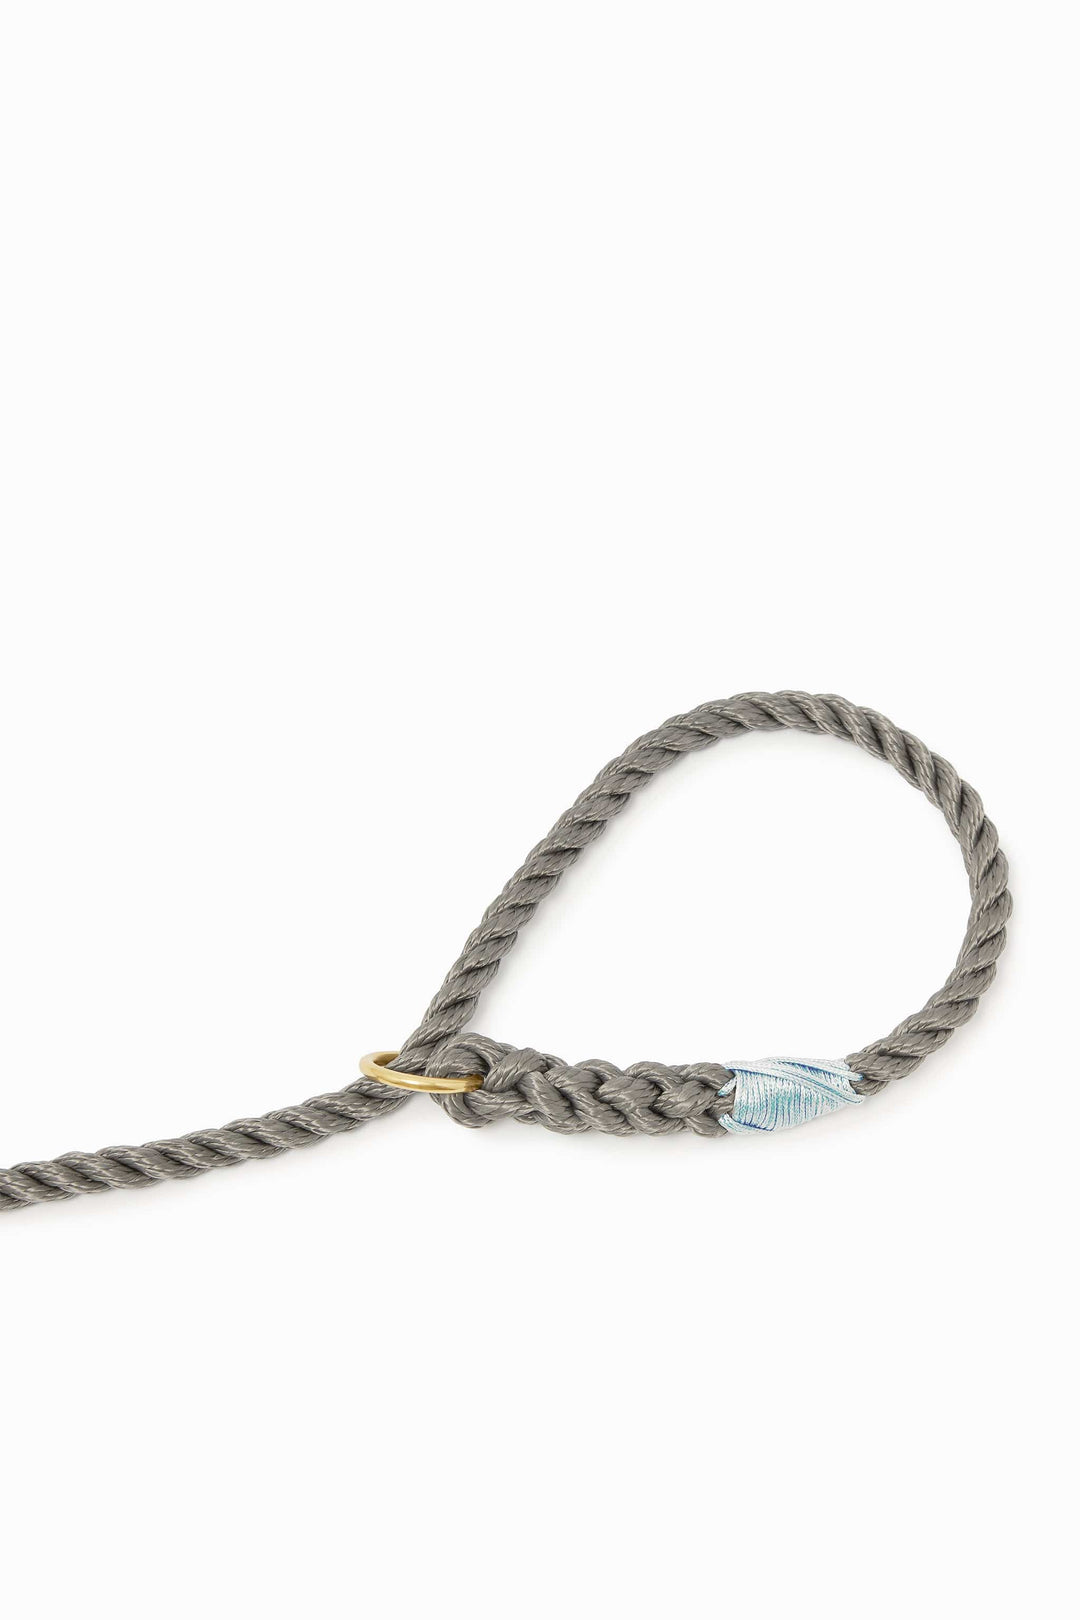 Rope dog slip lead for gundogs and training in winter grey, 5ft long